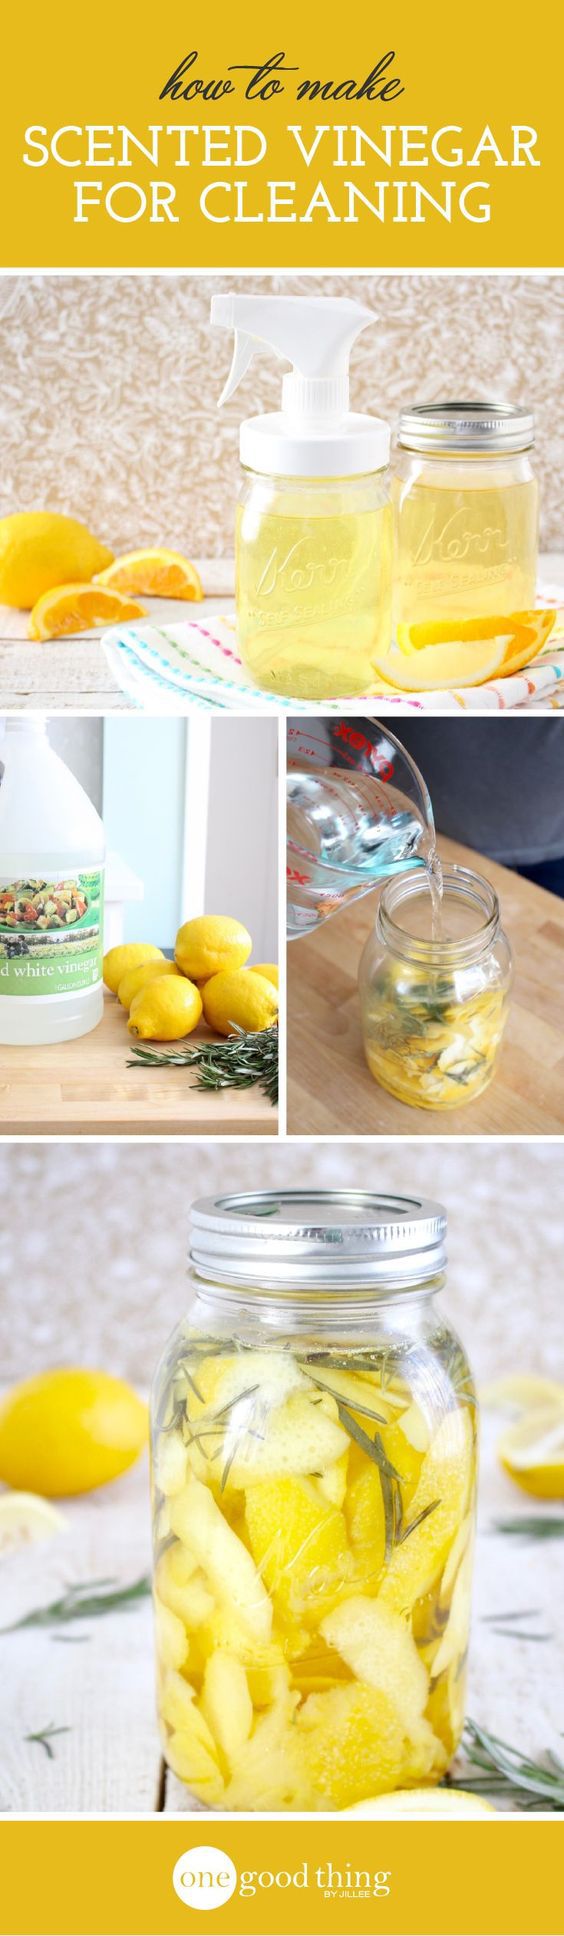 8 Genius Cleaning Hacks To Save You Time 7